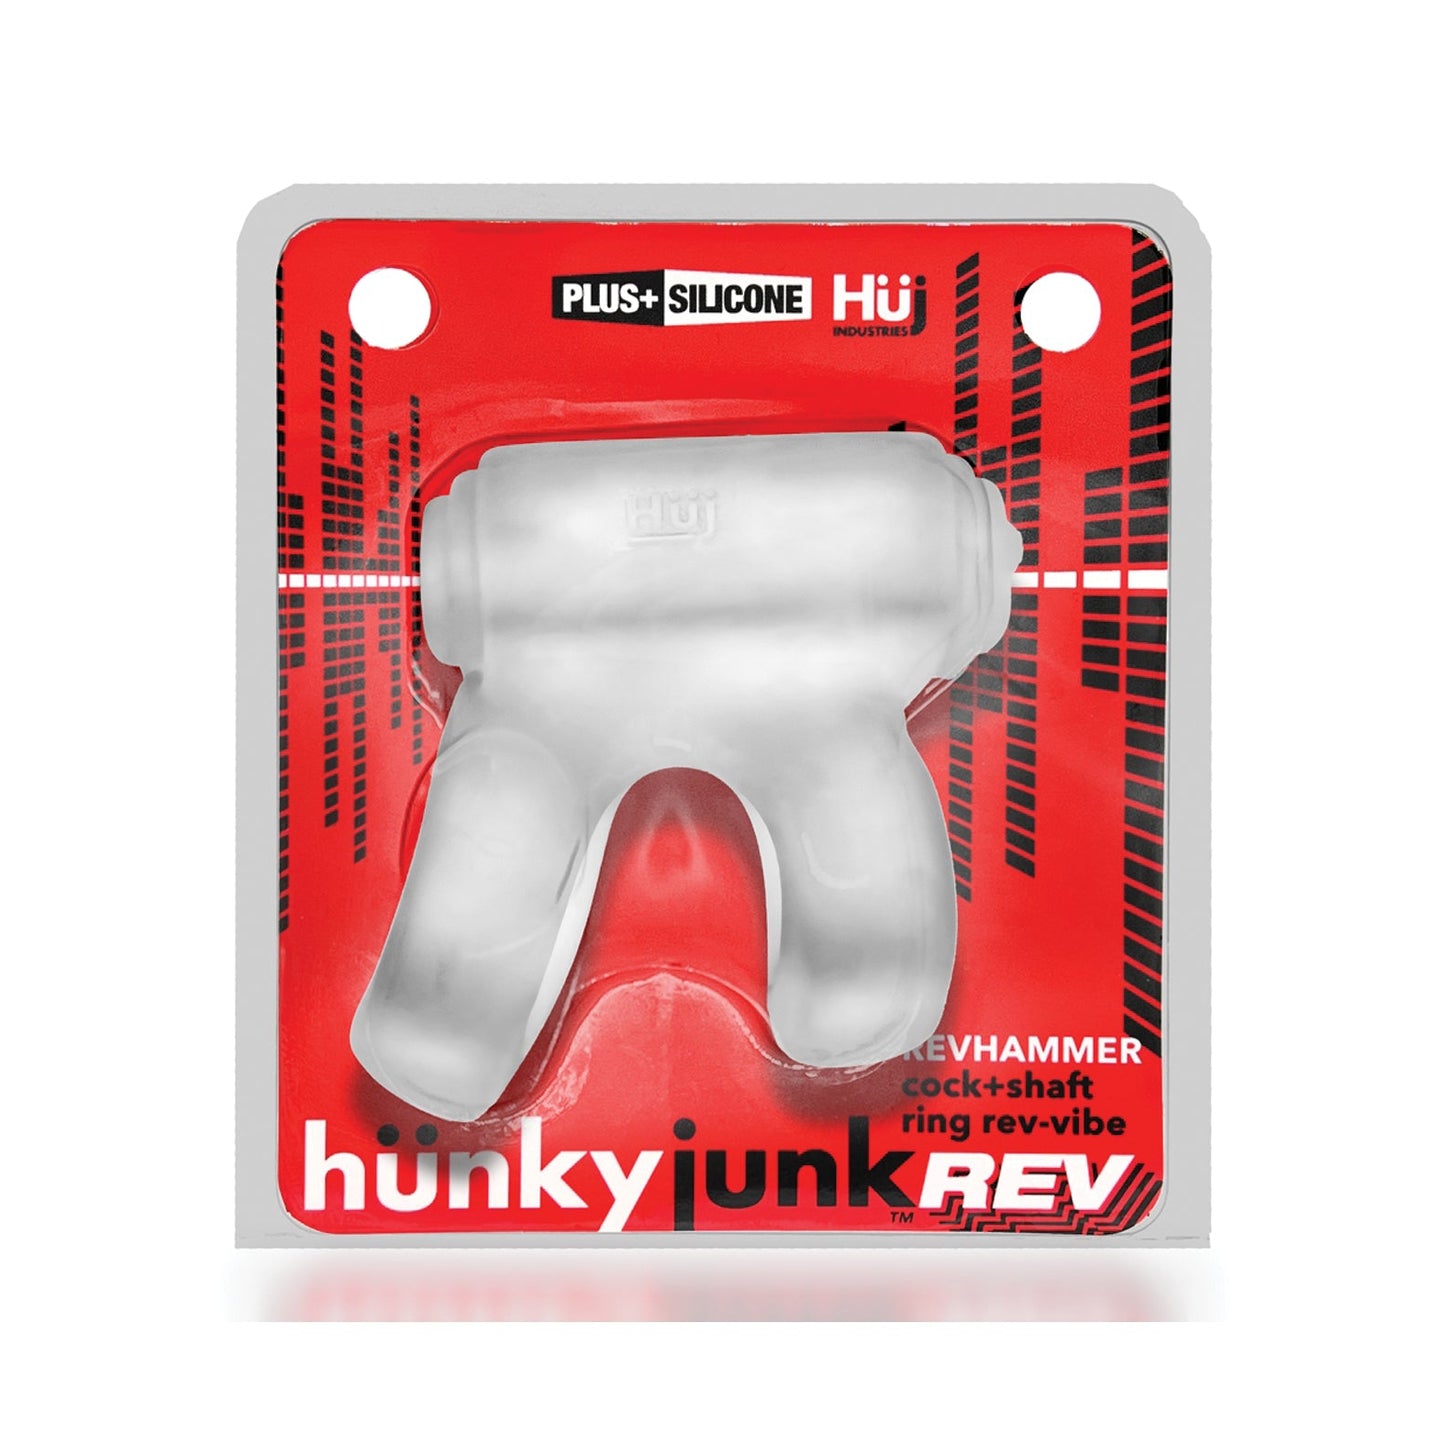 Hunky Junk Revhammer Shaft Vibe Ring - Clear Ice With Blue Vibe